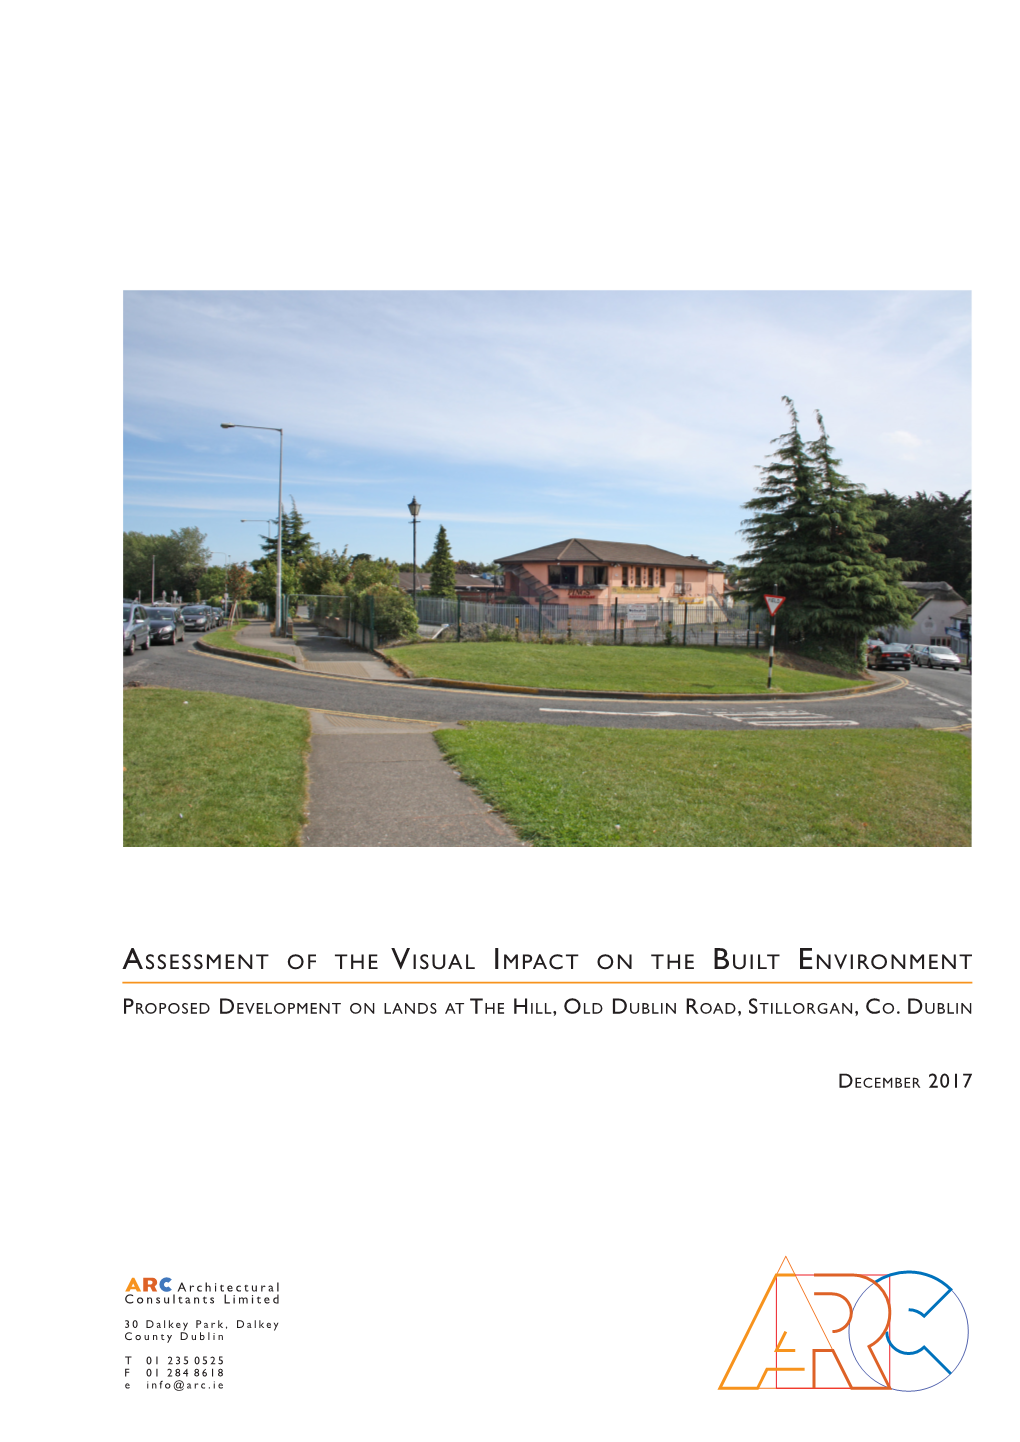 Assessment of the Visual Impact on the Built Environment